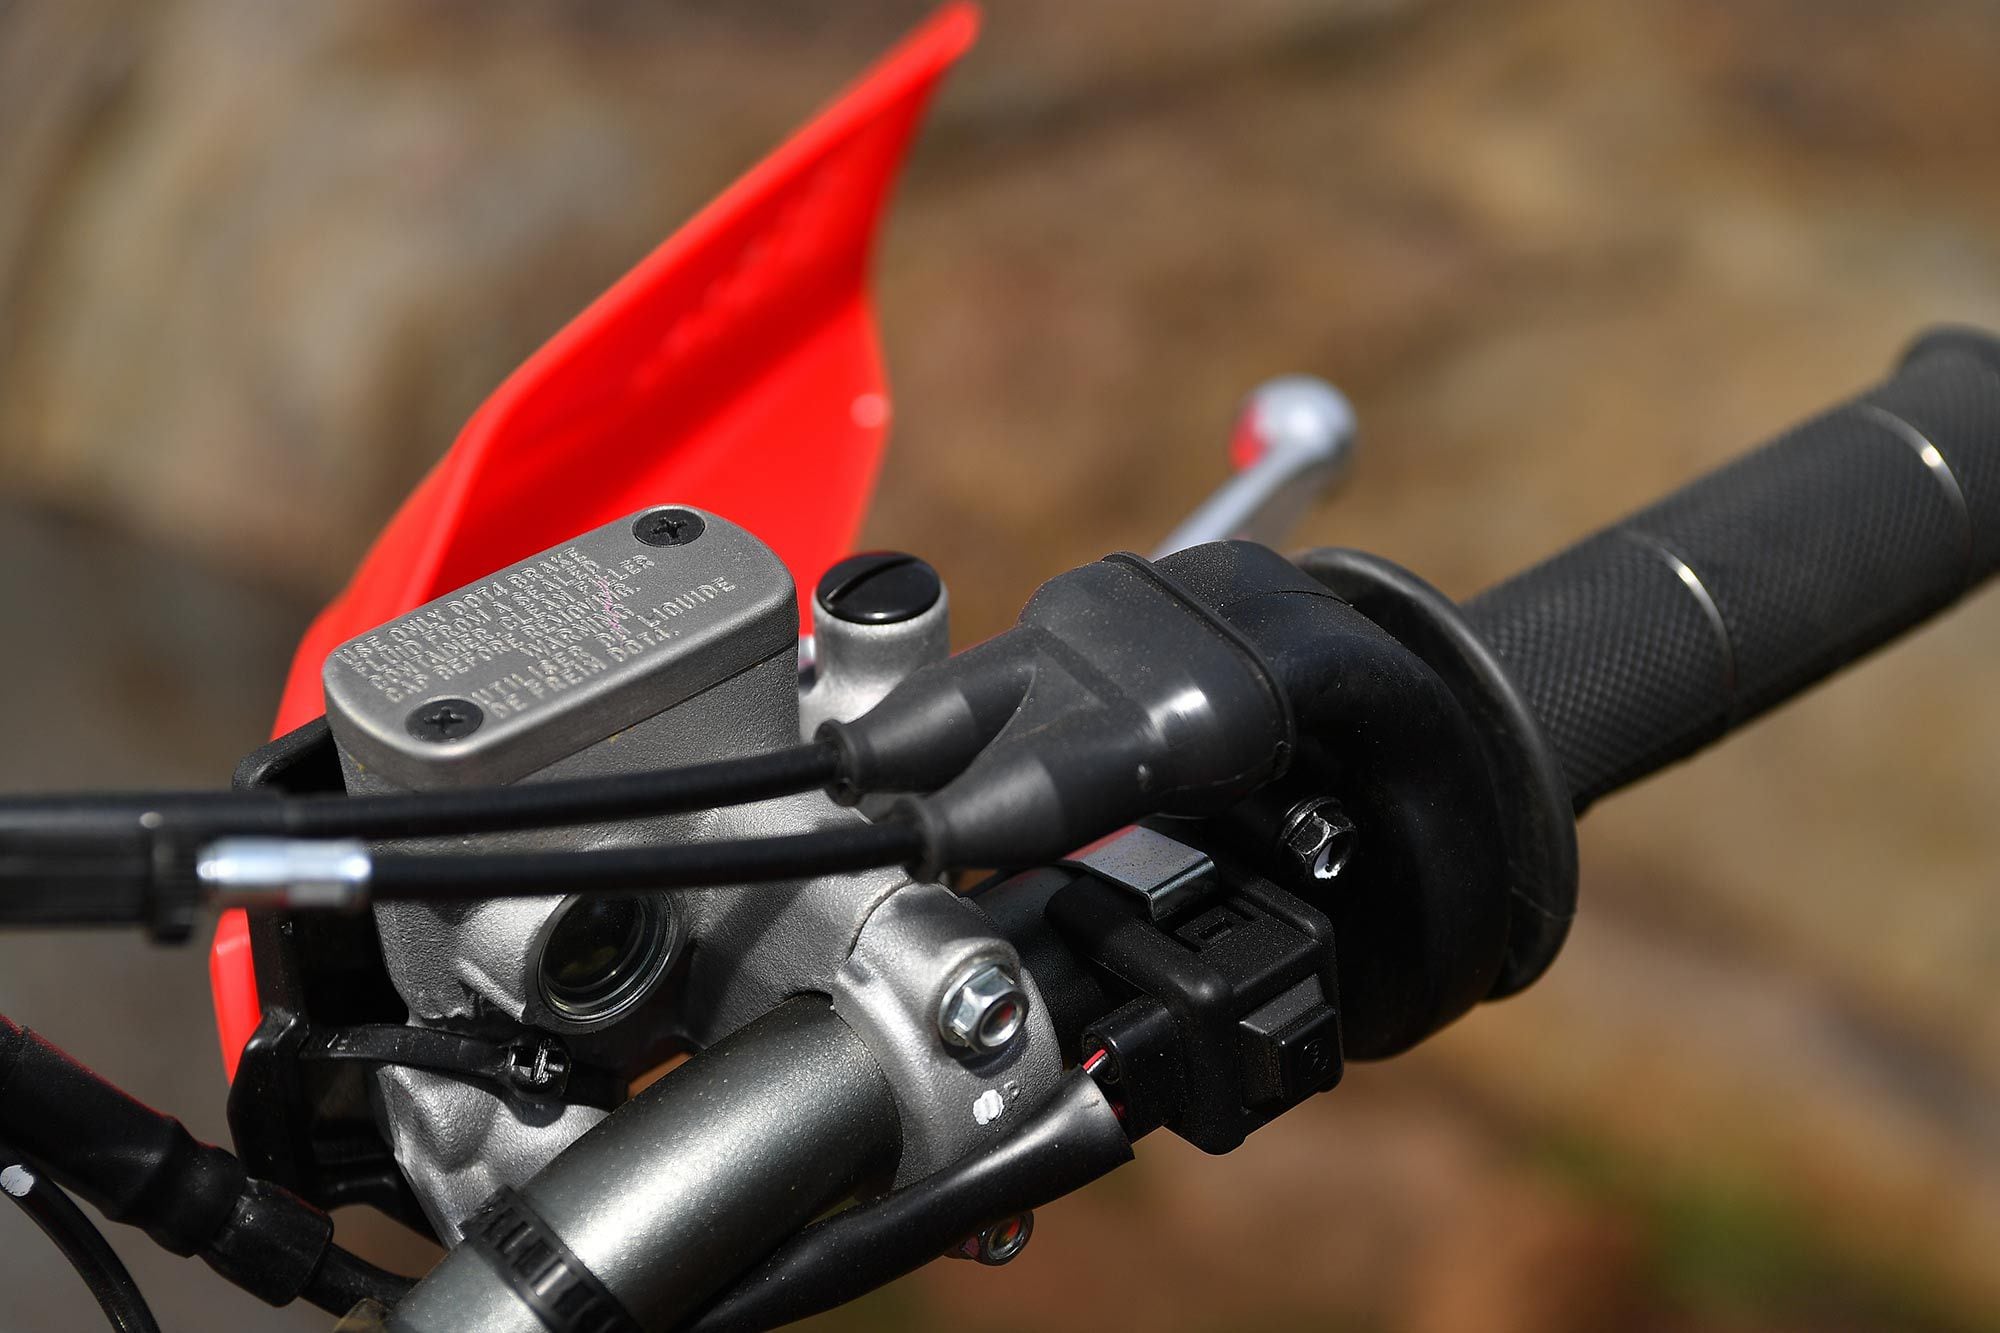 The Honda CRF450X and CRF450RL feature differing front brakes than those of the CRF450R and CRF450RX. Combined with a 260mm front rotor, the CRF450X can stop in a hurry for a heavier trailbike.